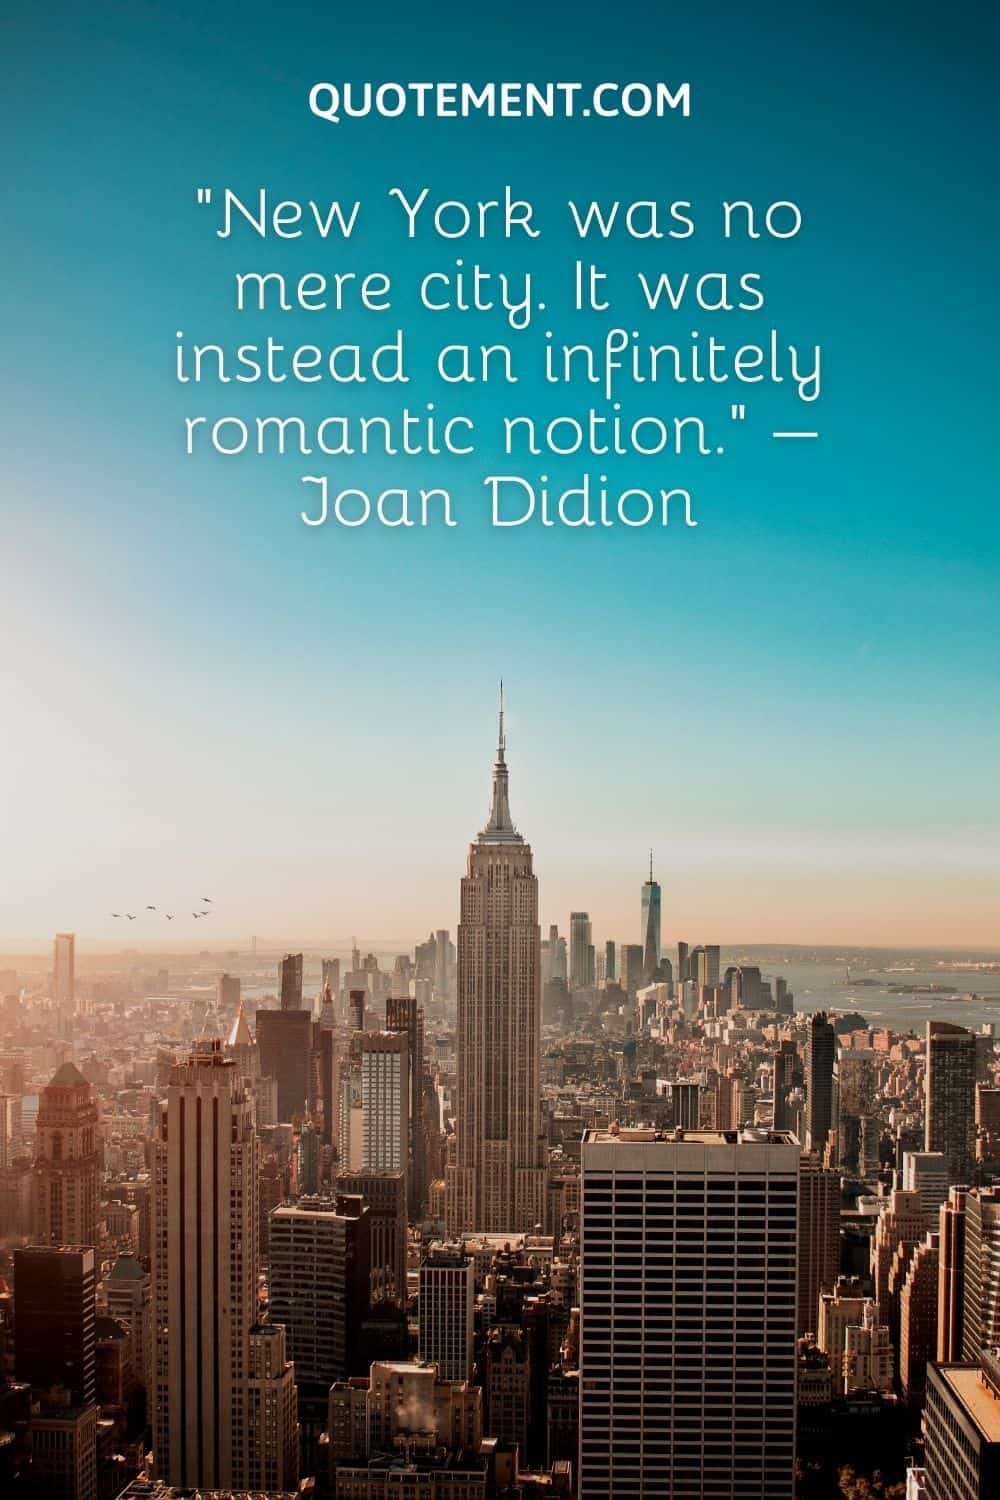 New York was no mere city. It was instead an infinitely romantic notion